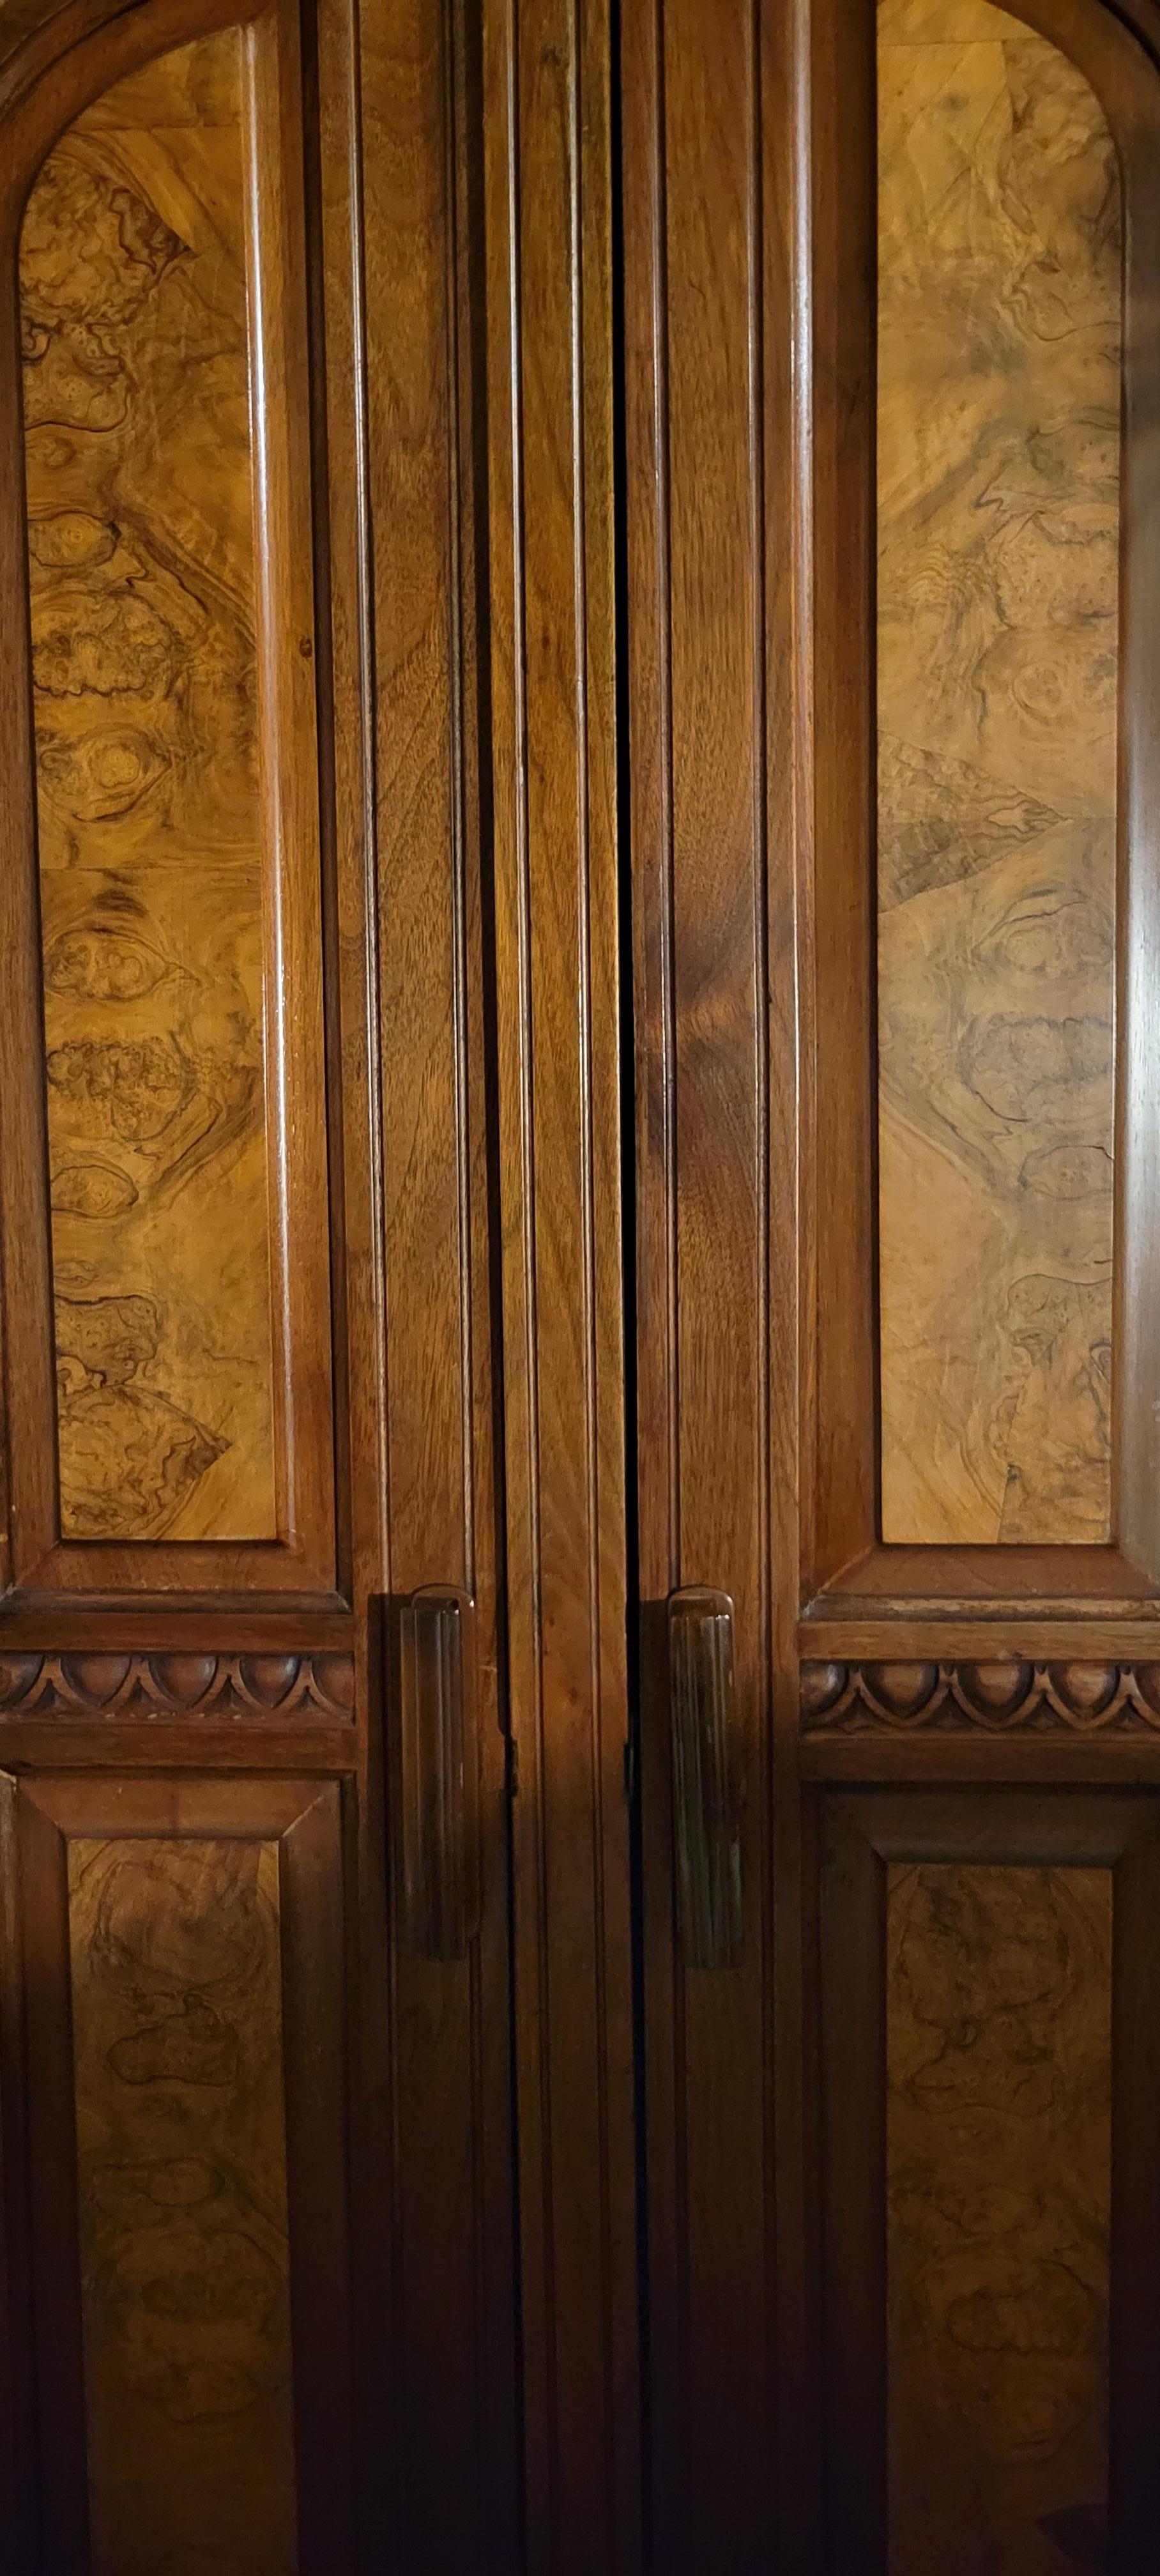 This British armoire is a wonderful piece of history that at some point in it's life traveled from the United Kingdom into the USA. It was made by the British company H. Murray and Co. that was located in Bolton, UK at 29 Knowsley Street. There is a